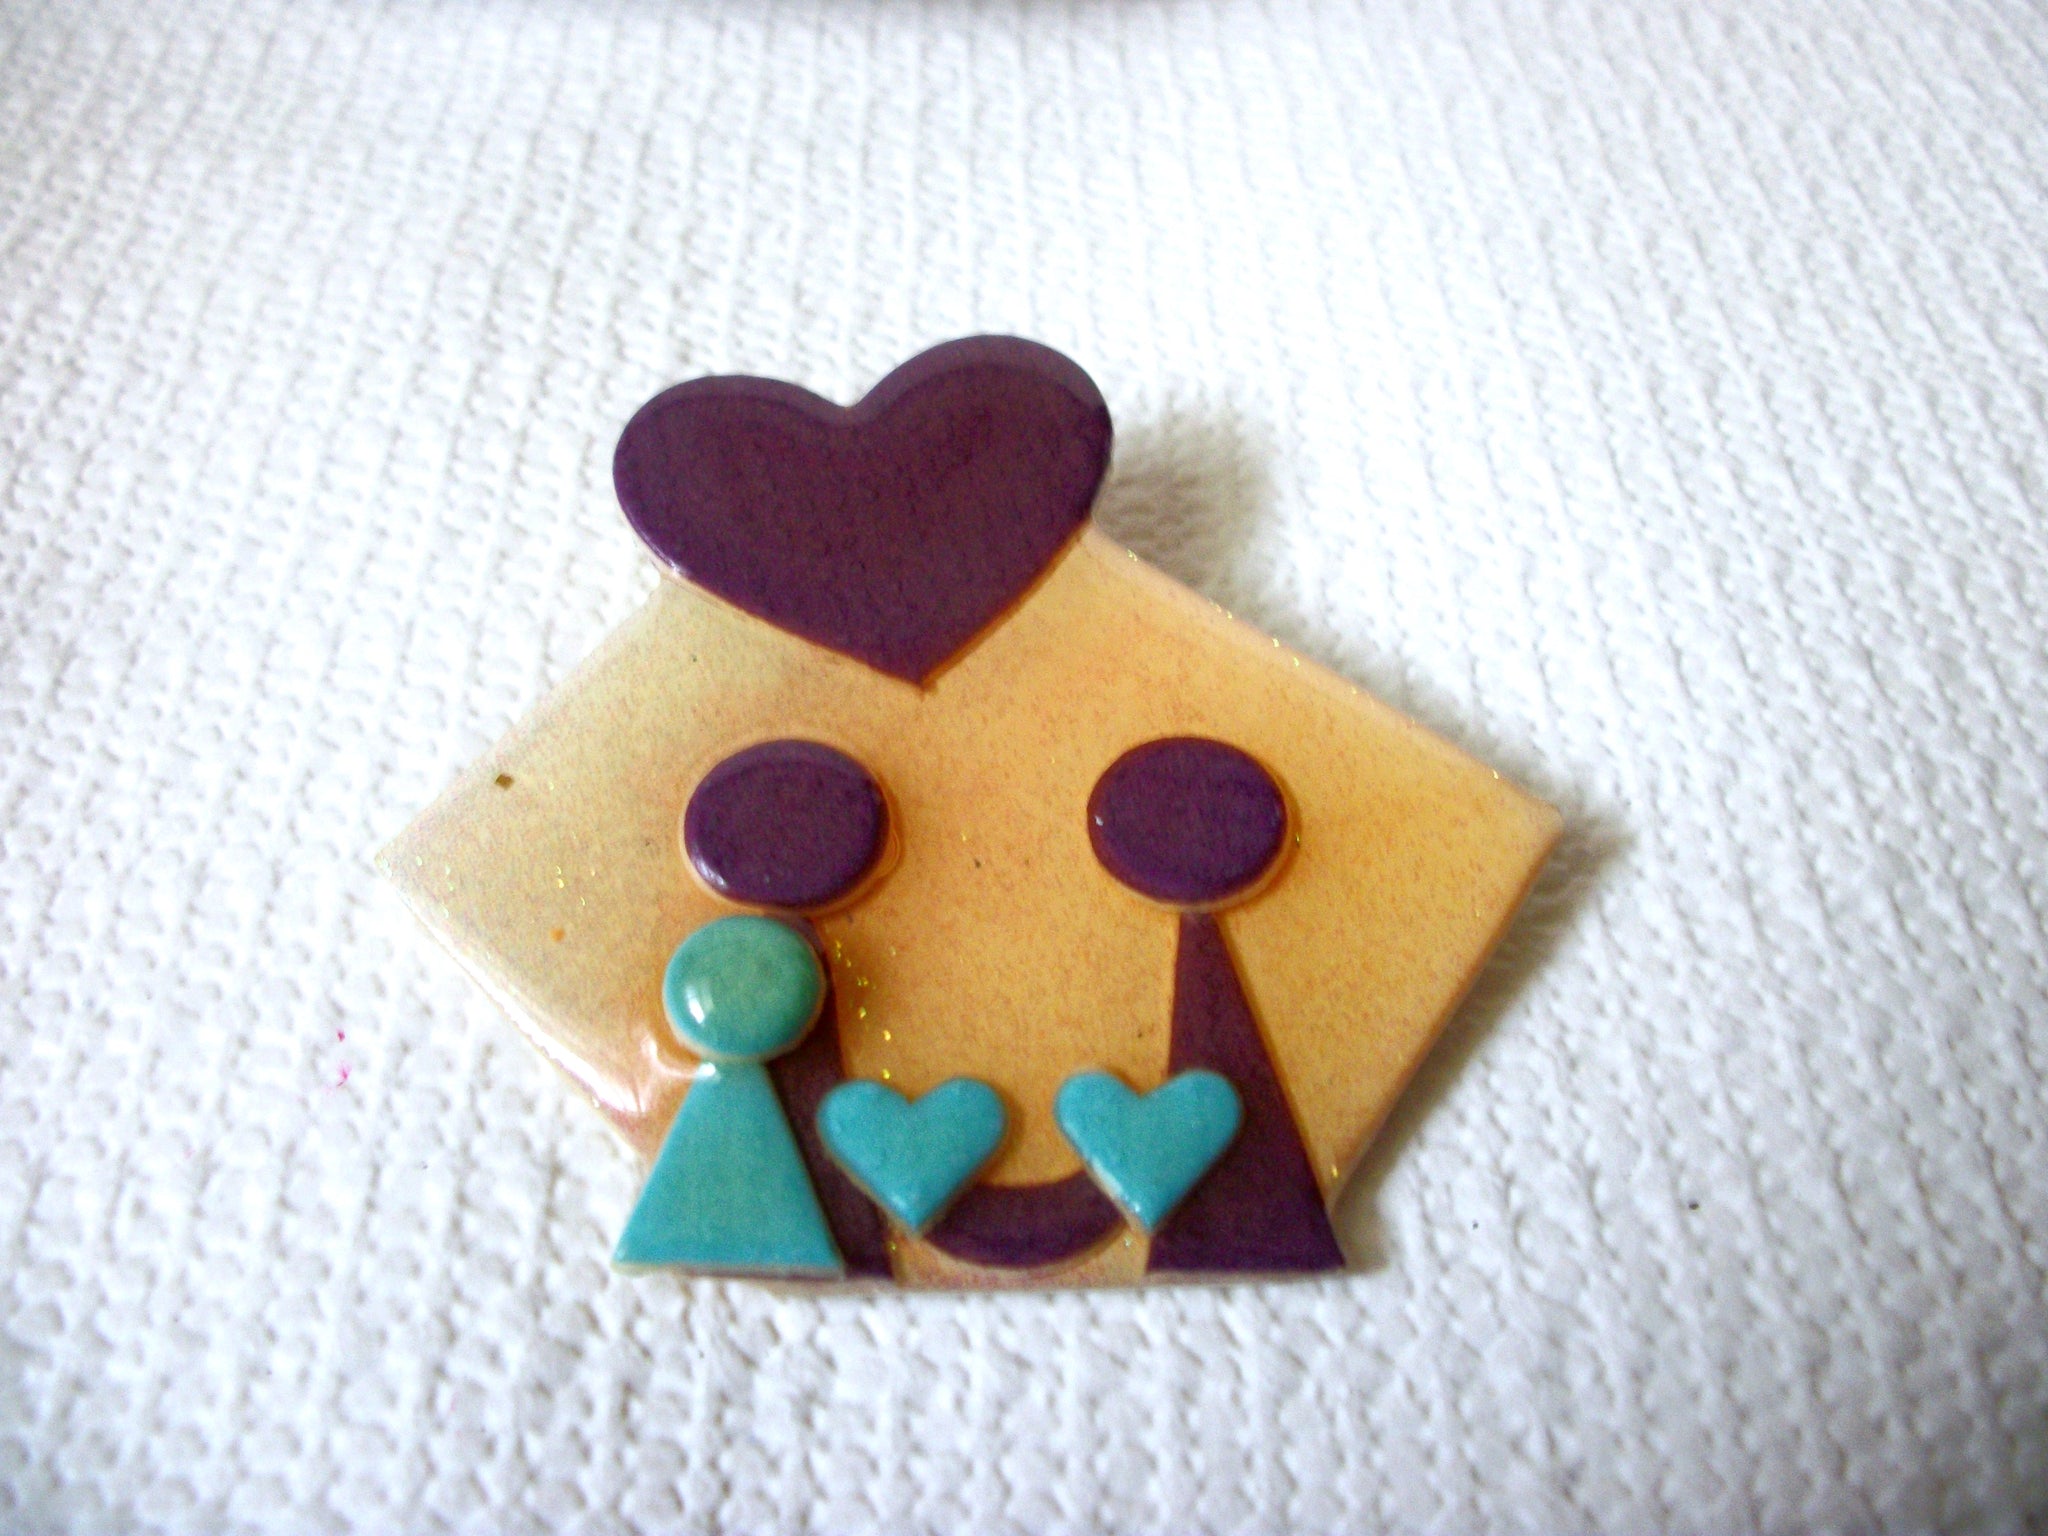 Designs By Lucinda, Love Little People Pins 40920